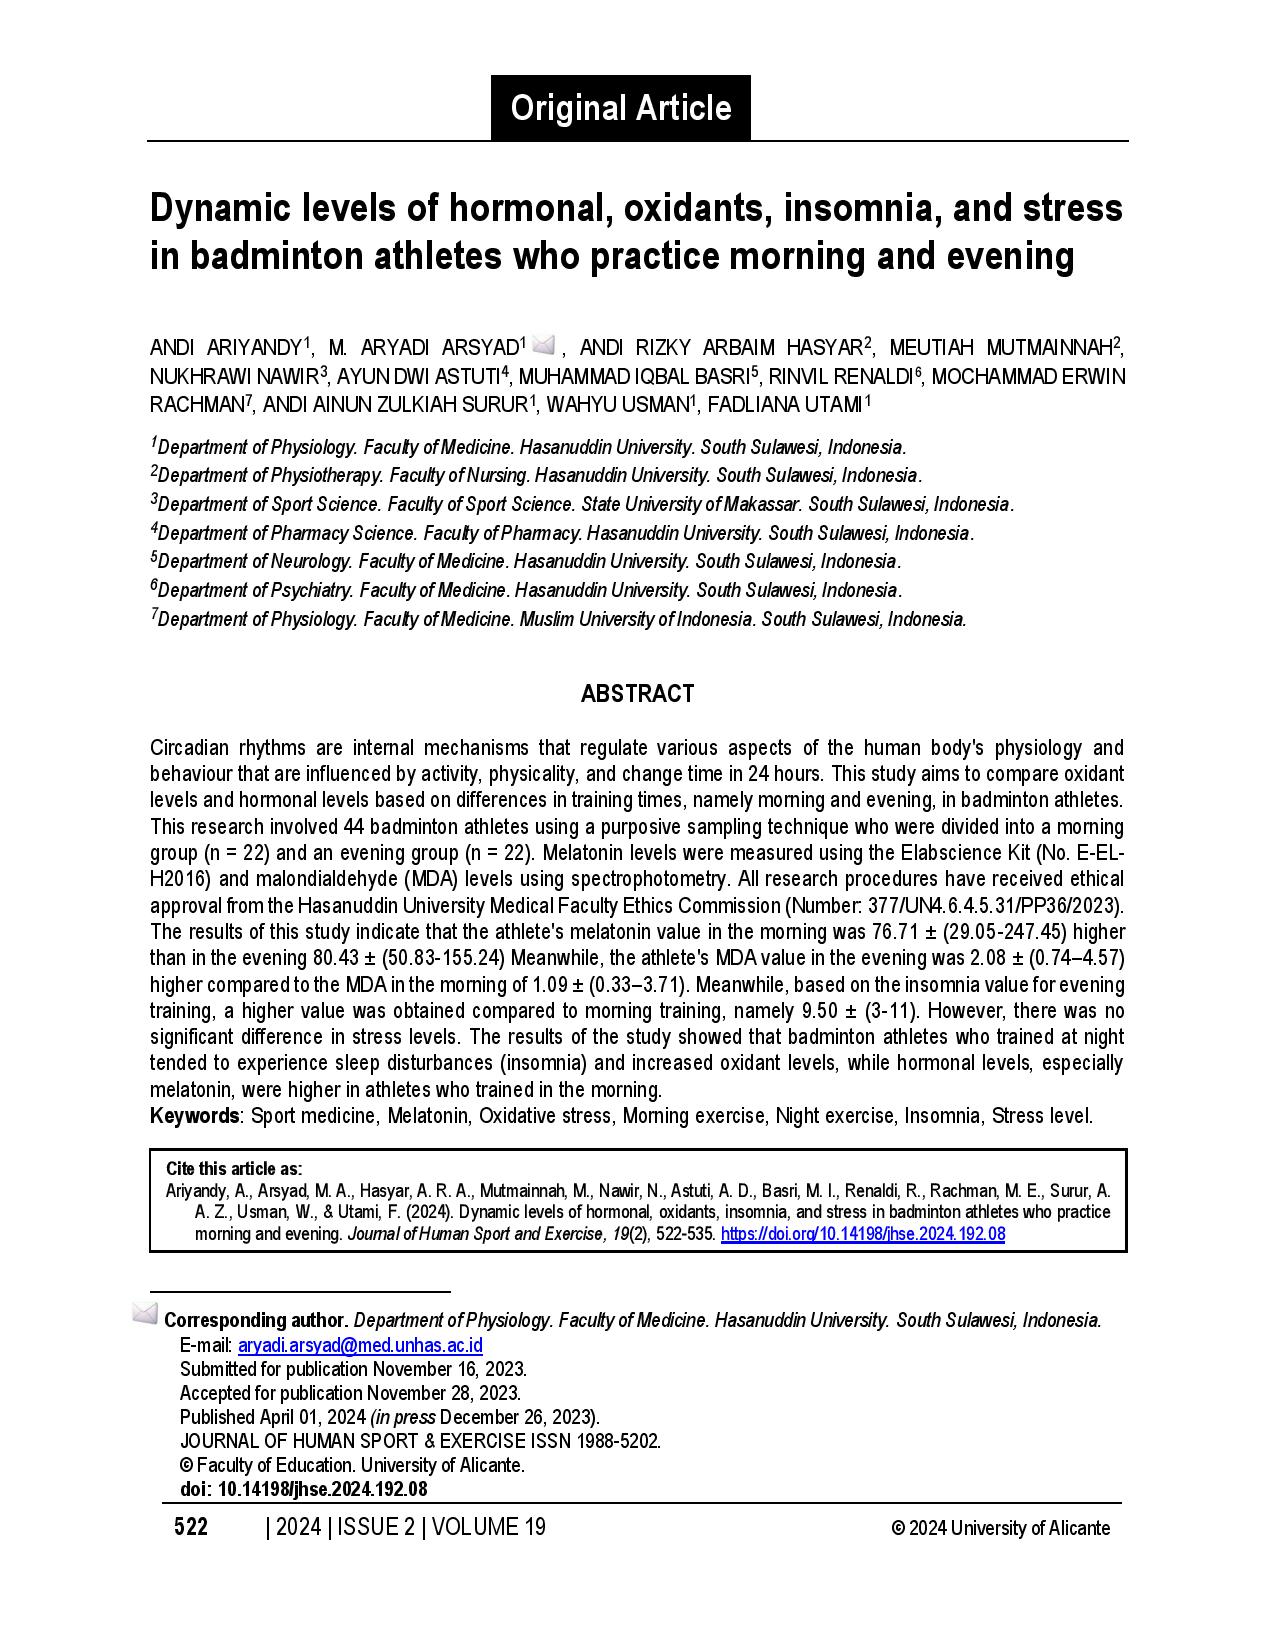 Dynamic levels of hormonal, oxidants, insomnia, and stress in badminton athletes who practice morning and evening